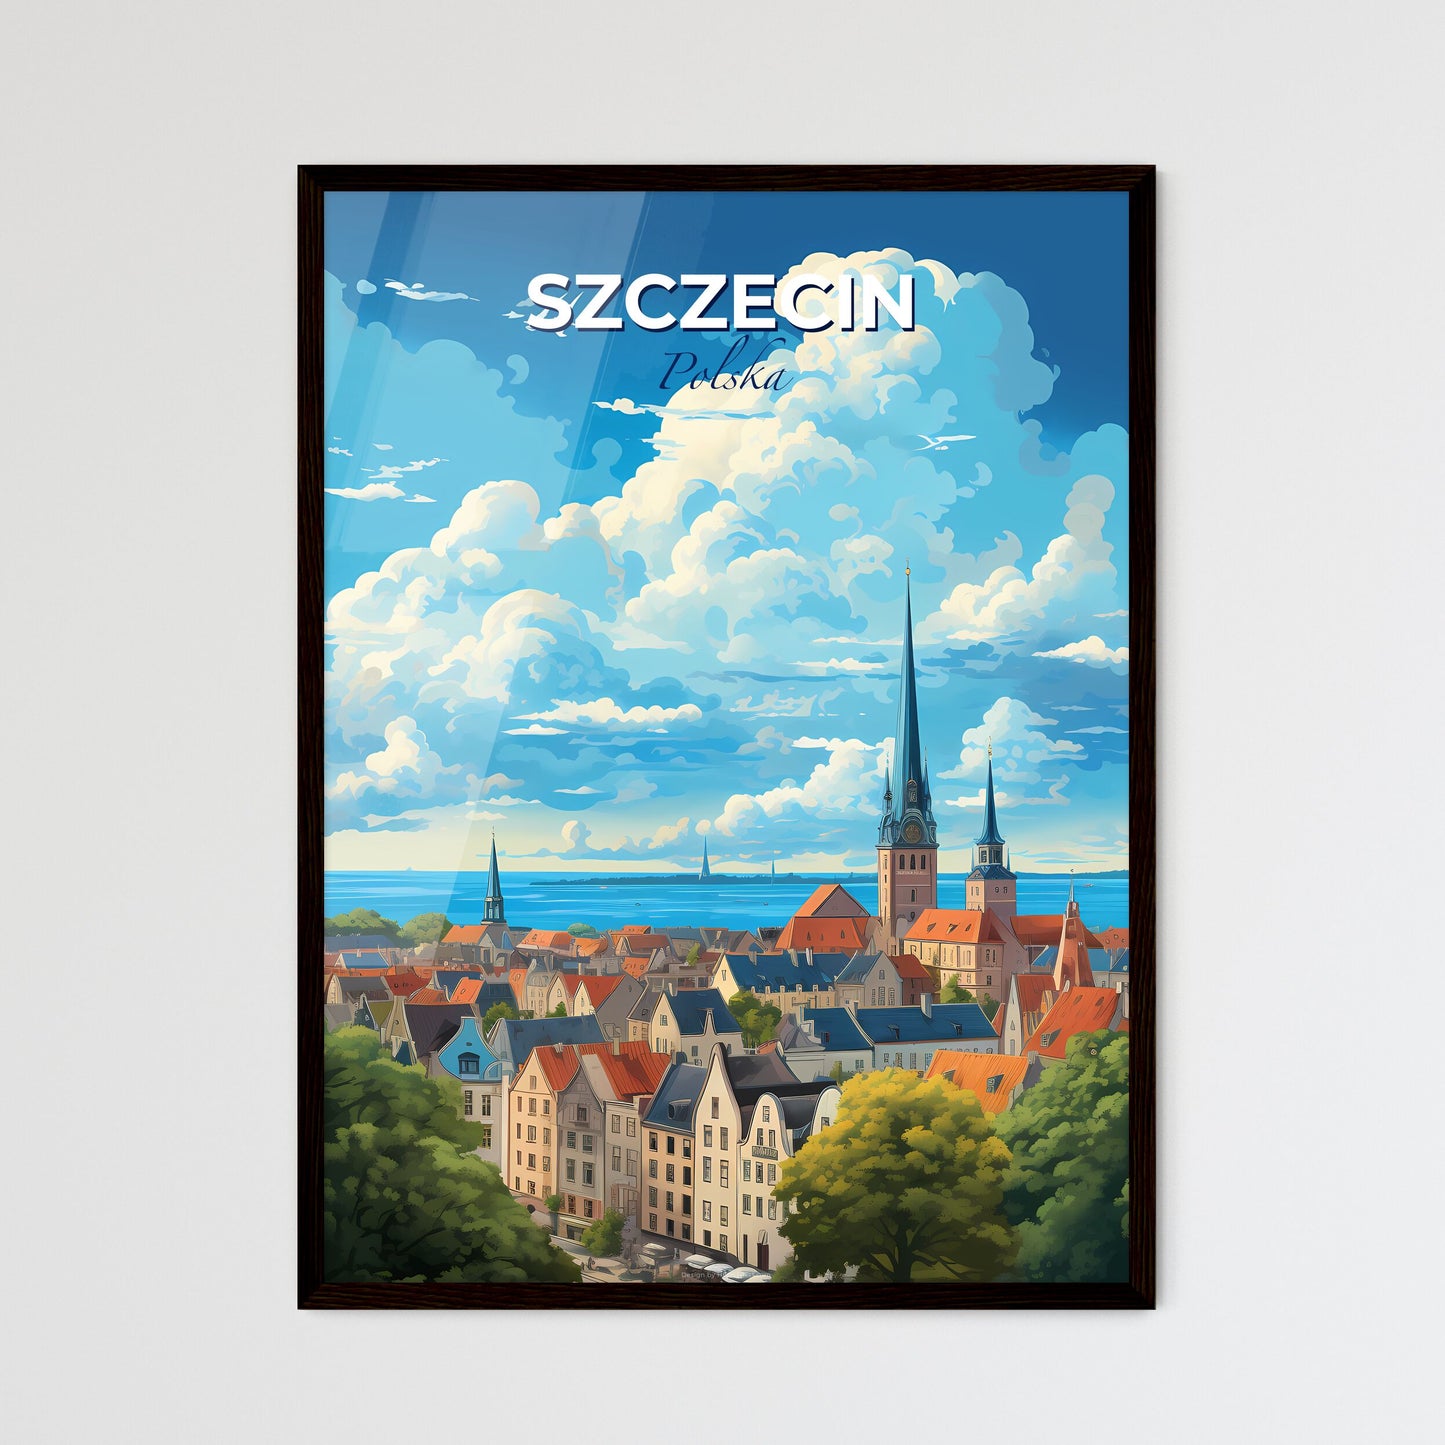 Szczecin Polska Skyline - A City With A Tall Spire And A Body Of Water - Customizable Travel Gift Default Title